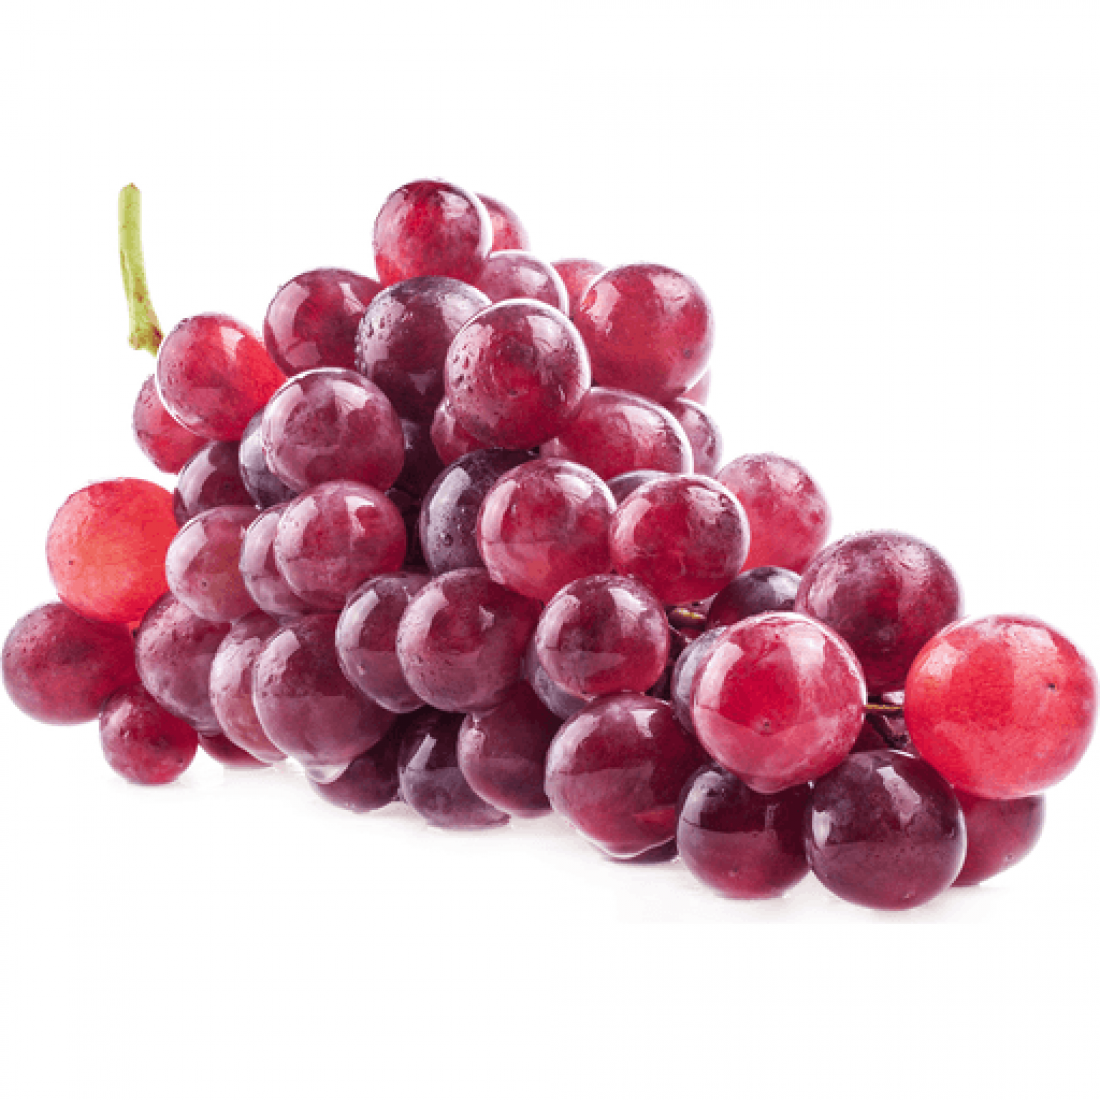 AUS/South Africa Red Seedless Grapes